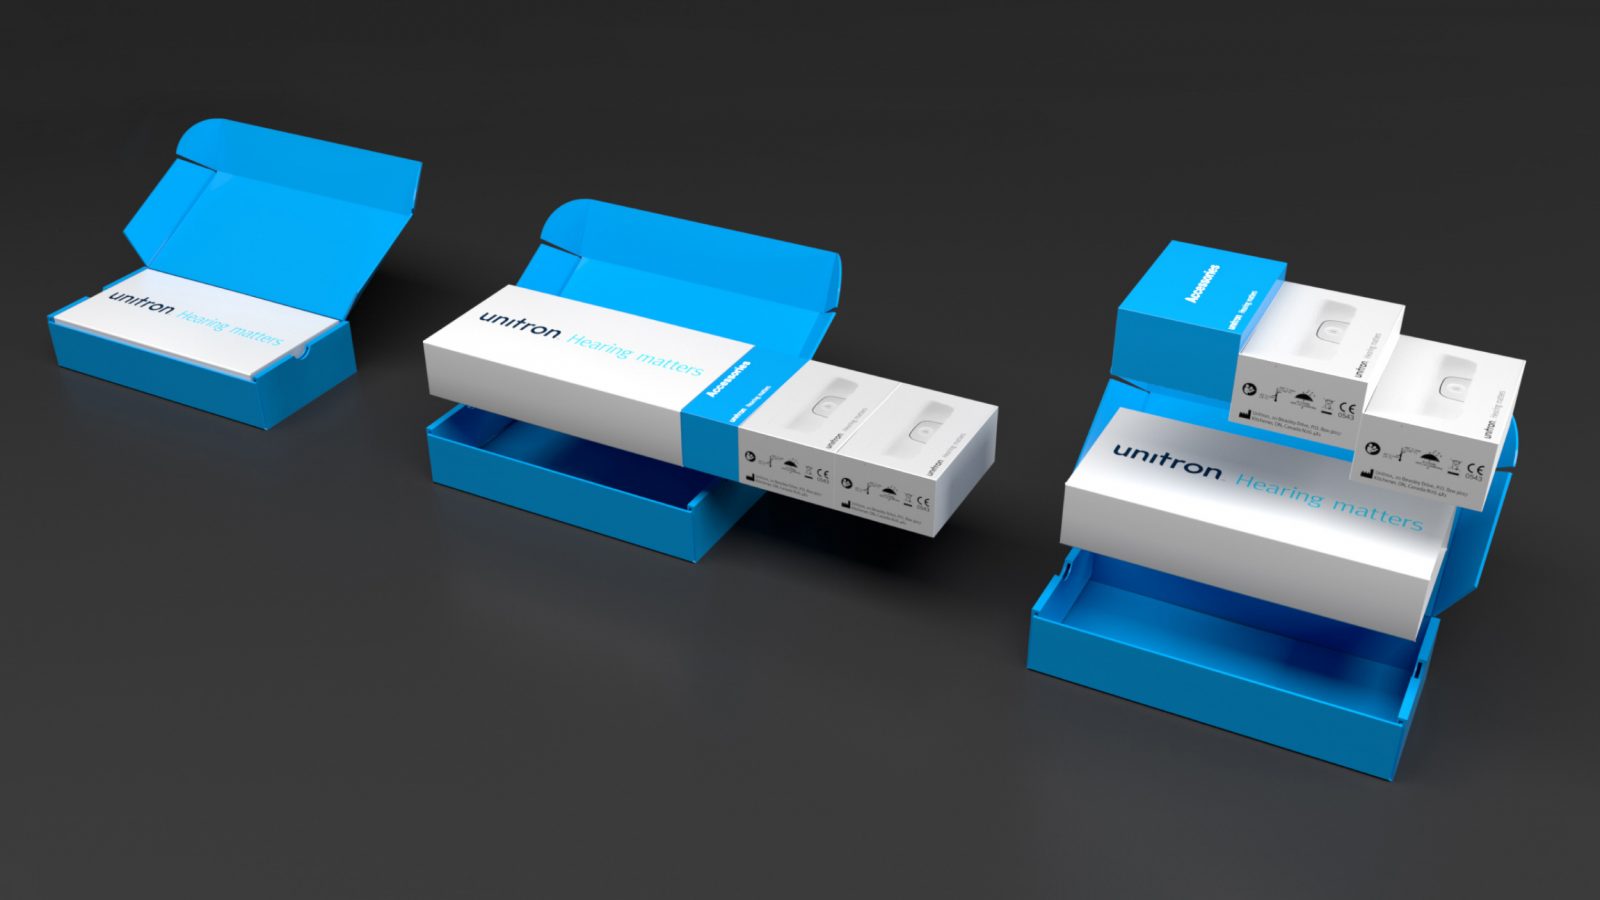 3D CGI Render of unitron medical packaging created by Celf Creative